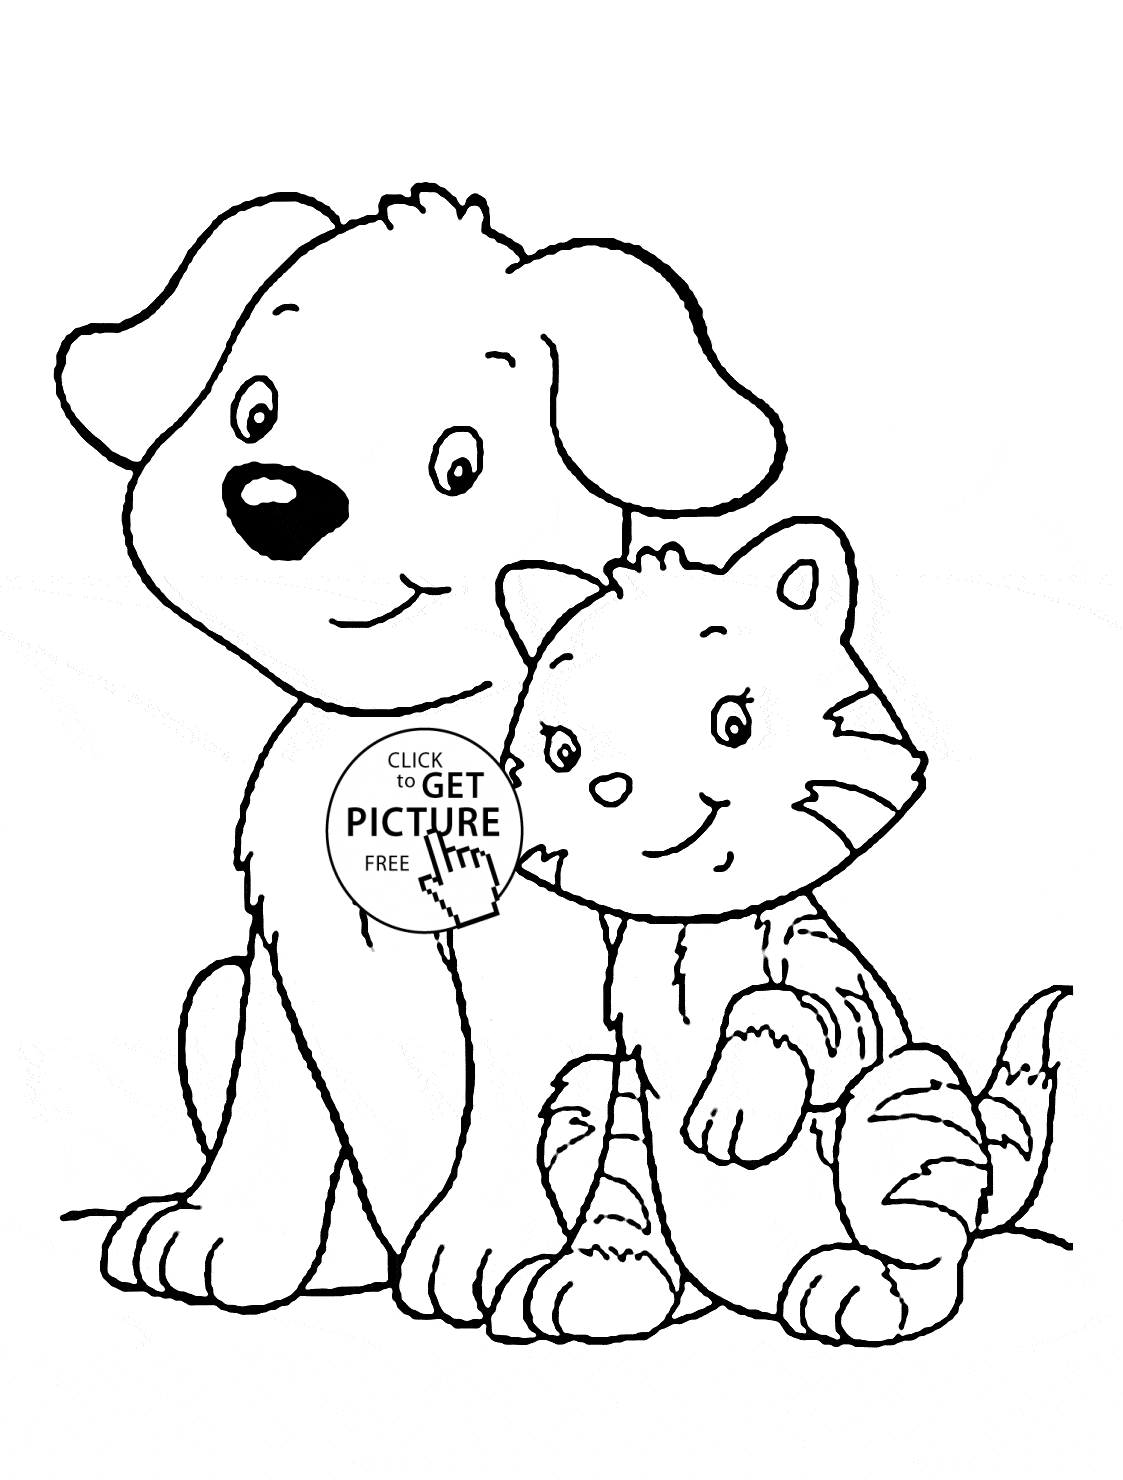 Free Coloring Pages Dog And Kat - Coloring Home